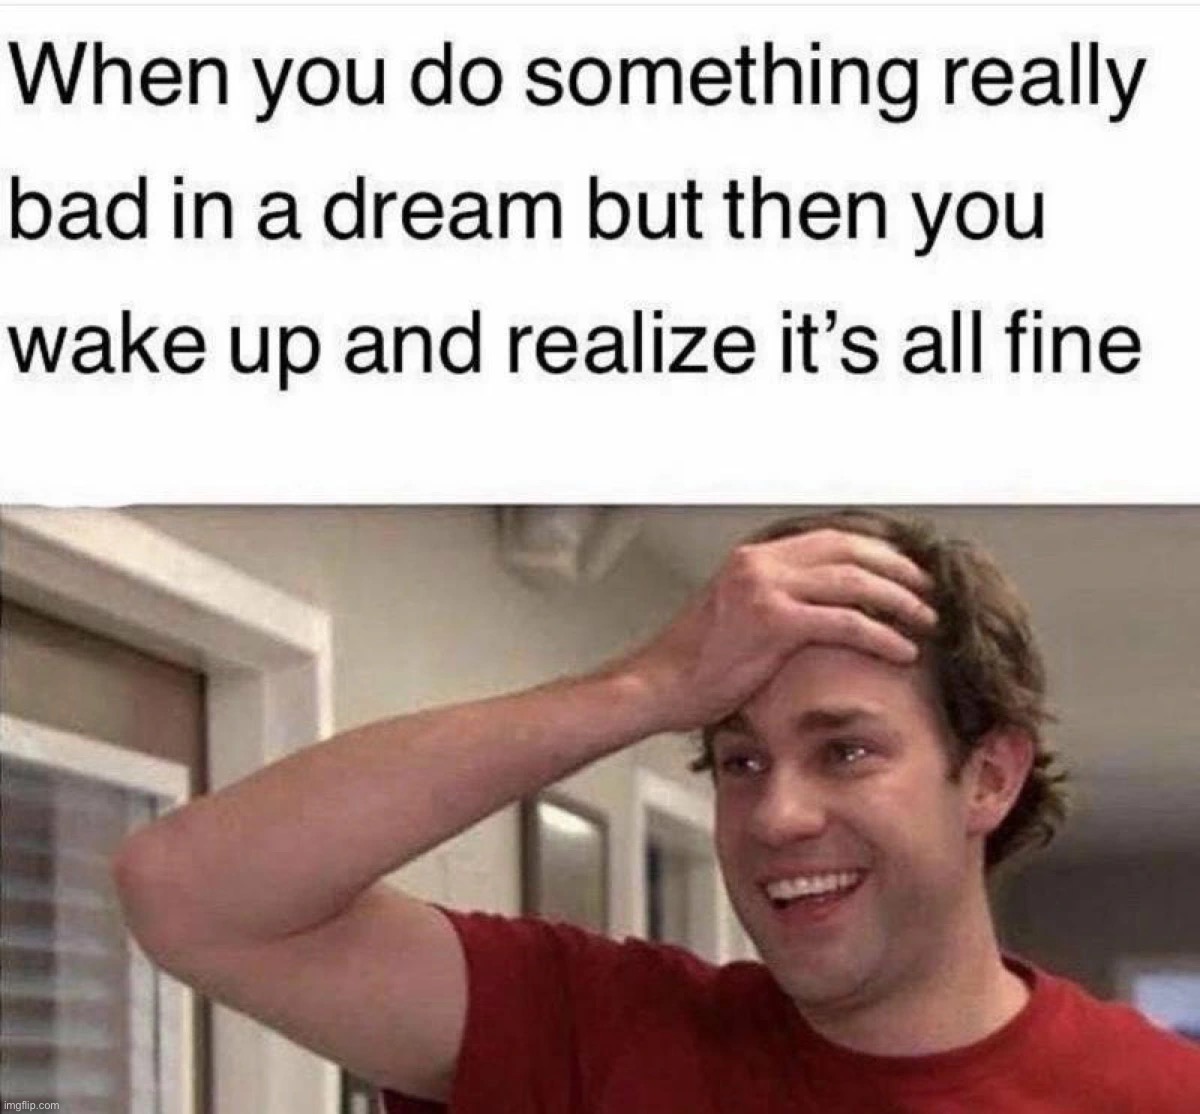 THANK GOD | image tagged in memes,funny,dark humor,lmao,oop,dream | made w/ Imgflip meme maker